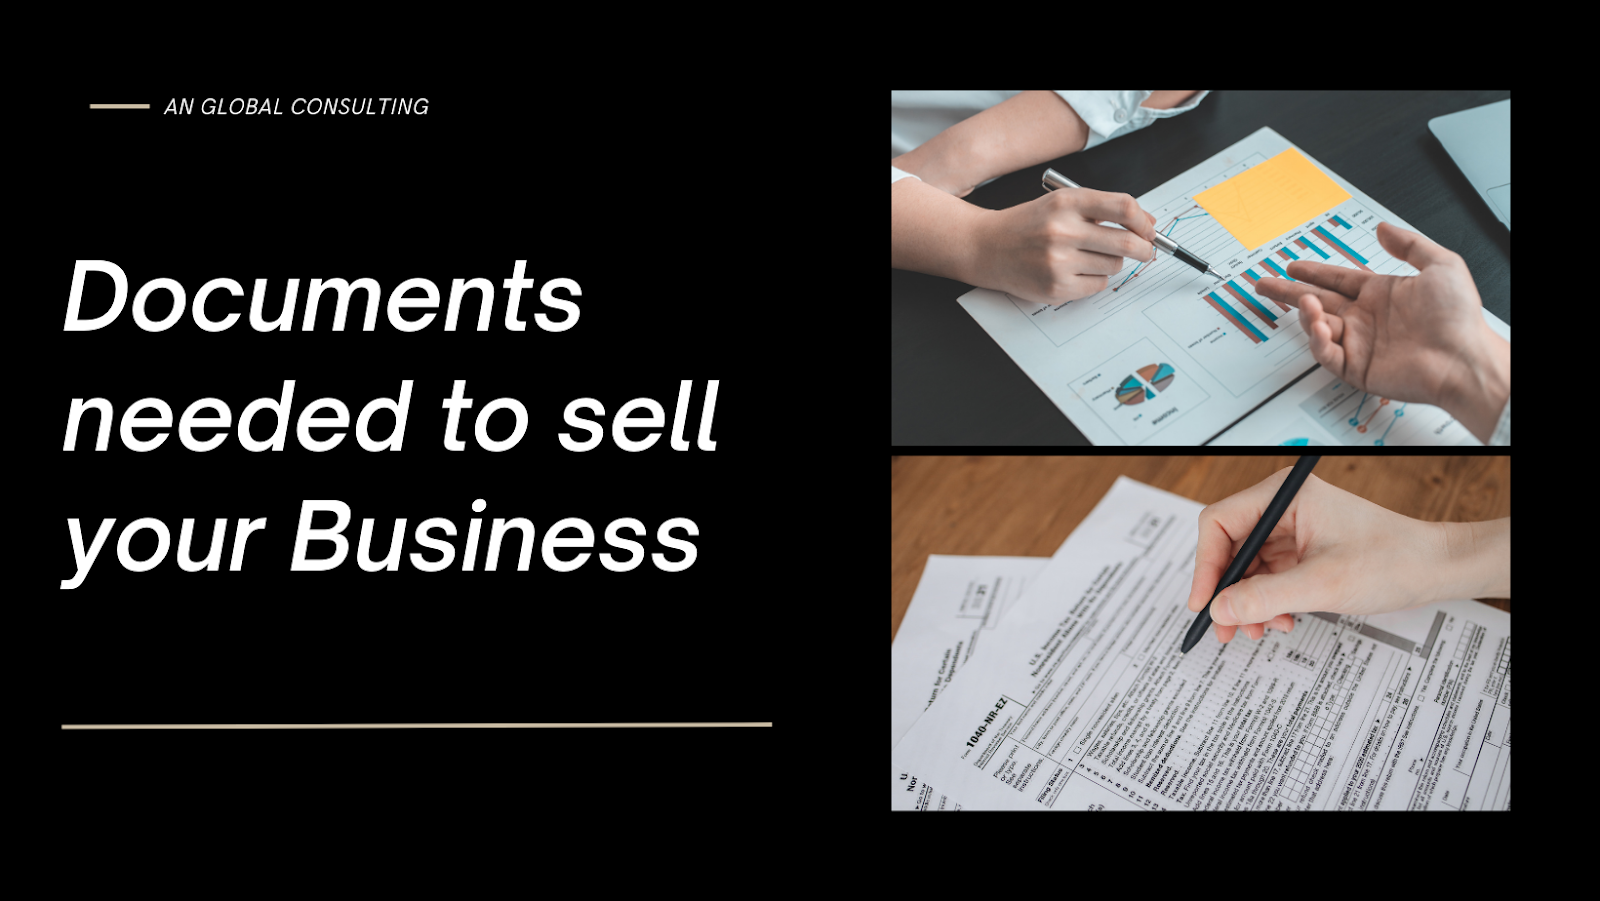 Documents needed to sell a business - AN Global Consulting